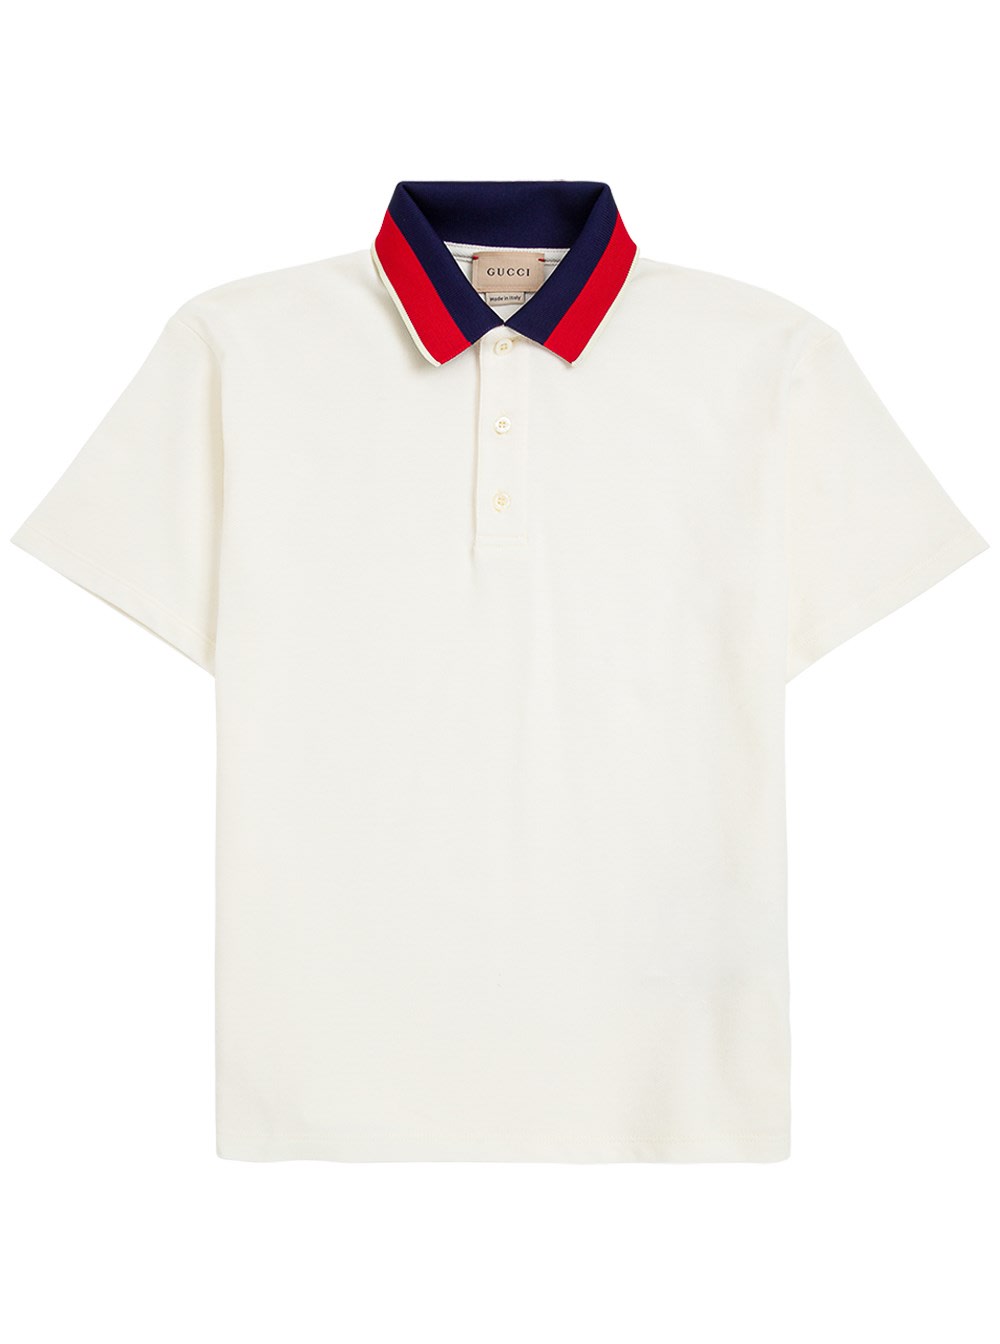 Gucci Cotton Polo Shirt With Blue And Red Collar